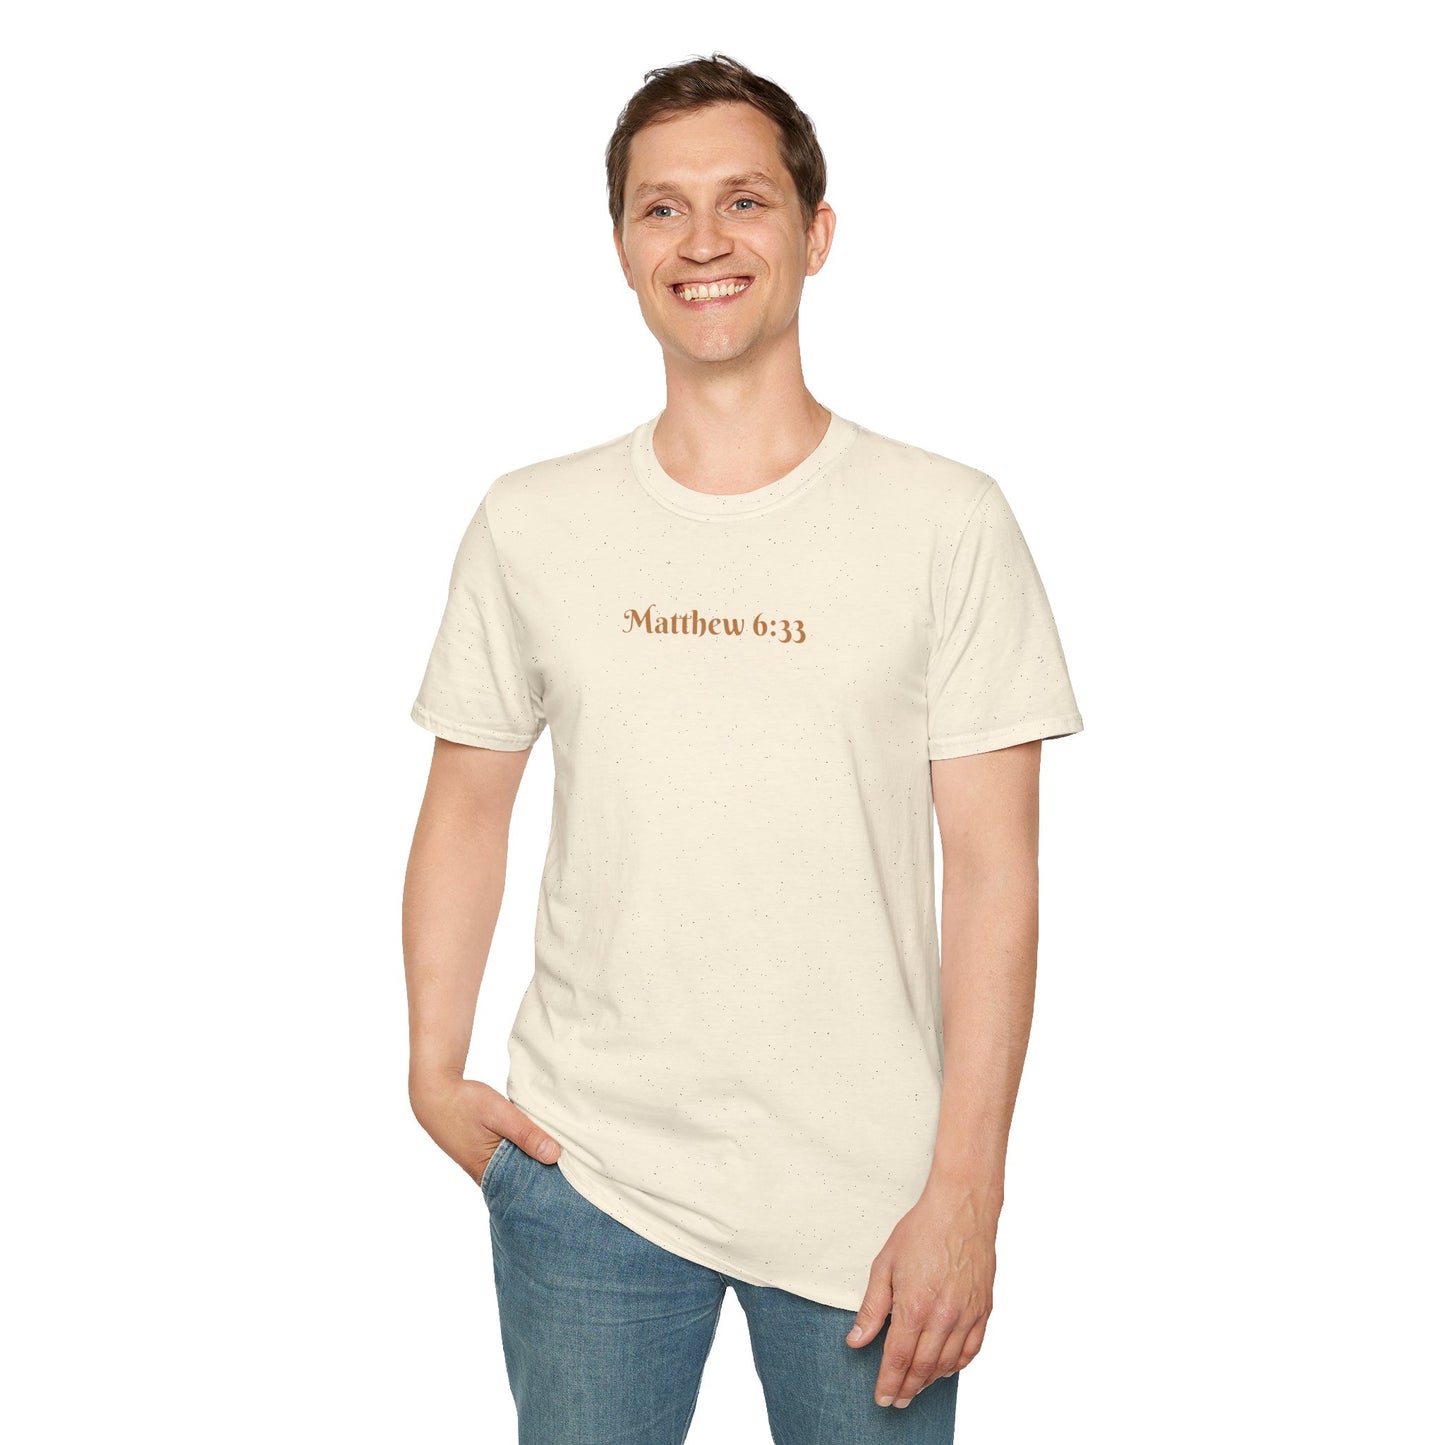 Seek First (Color) Unisex Softstyle T-Shirt